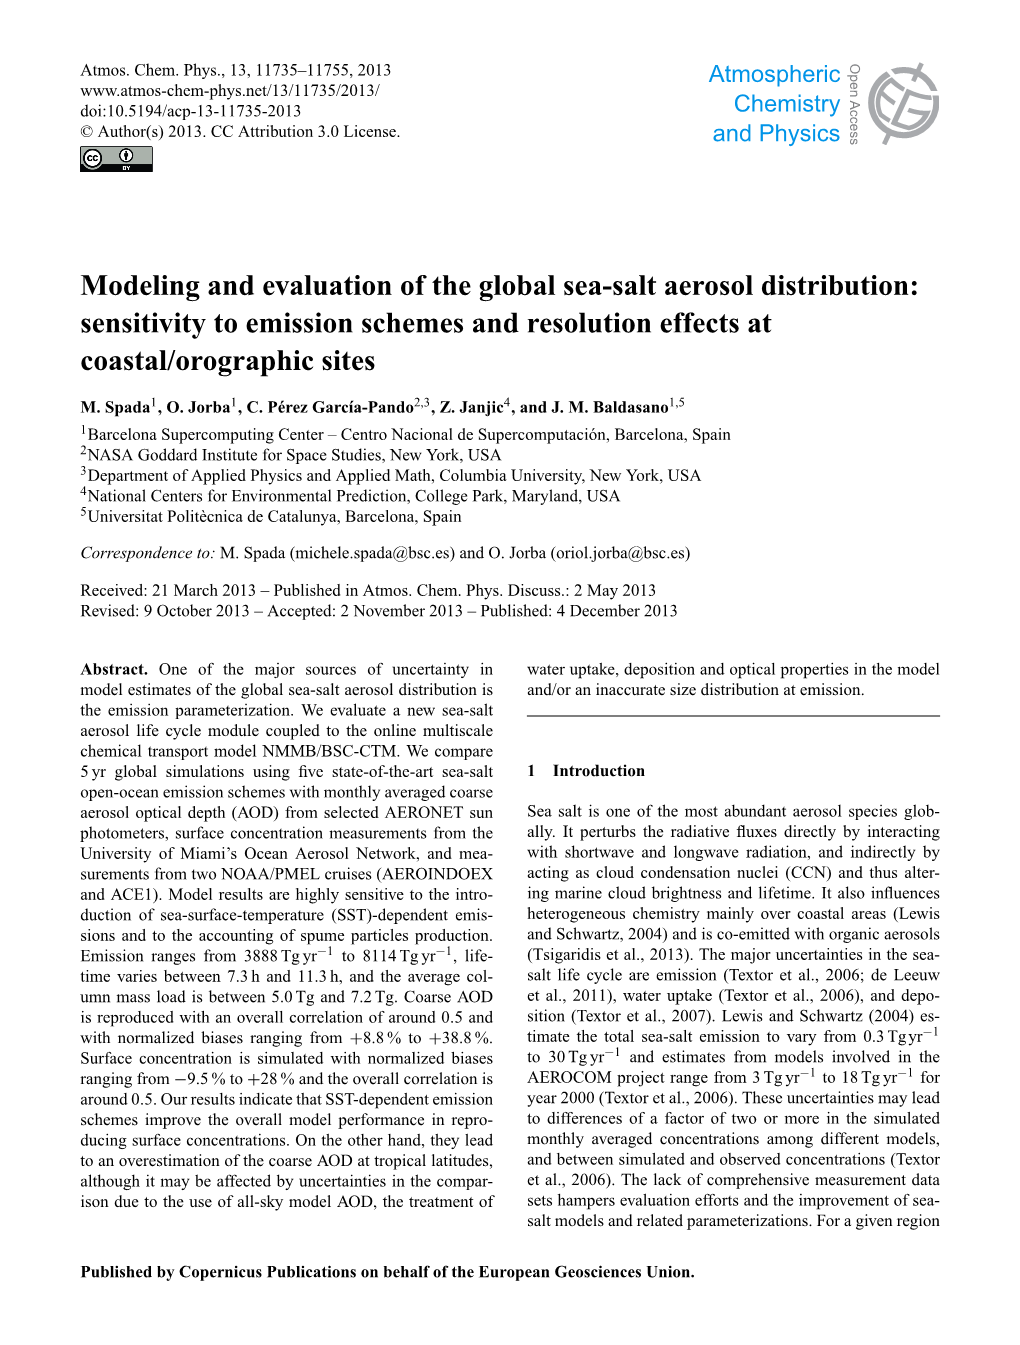 Modeling and Evaluation of the Global Sea-Salt Aerosol Distribution: Sensitivity to Emission Schemes and Resolution Effects at Coastal/Orographic Sites